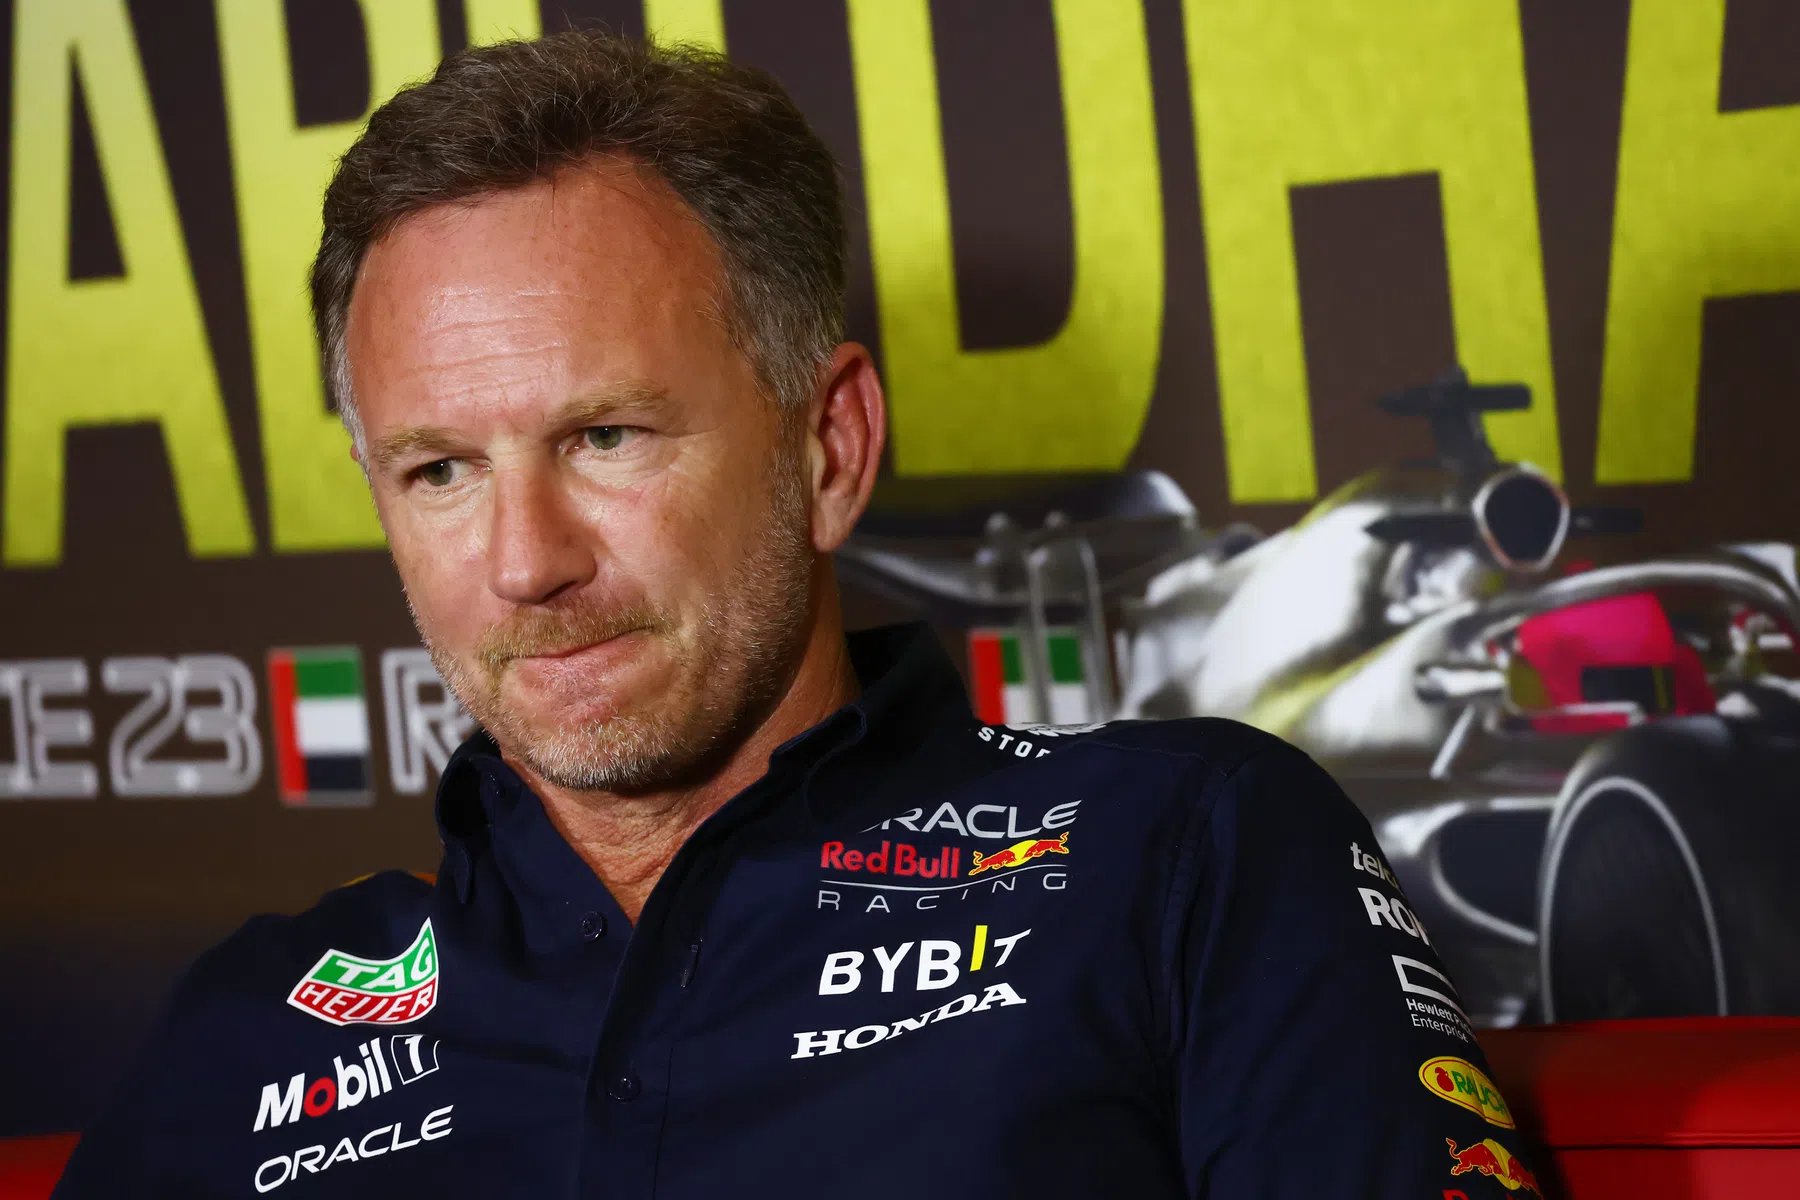 Red Bull investigate after allegations of inappropriate behaviour by Horner